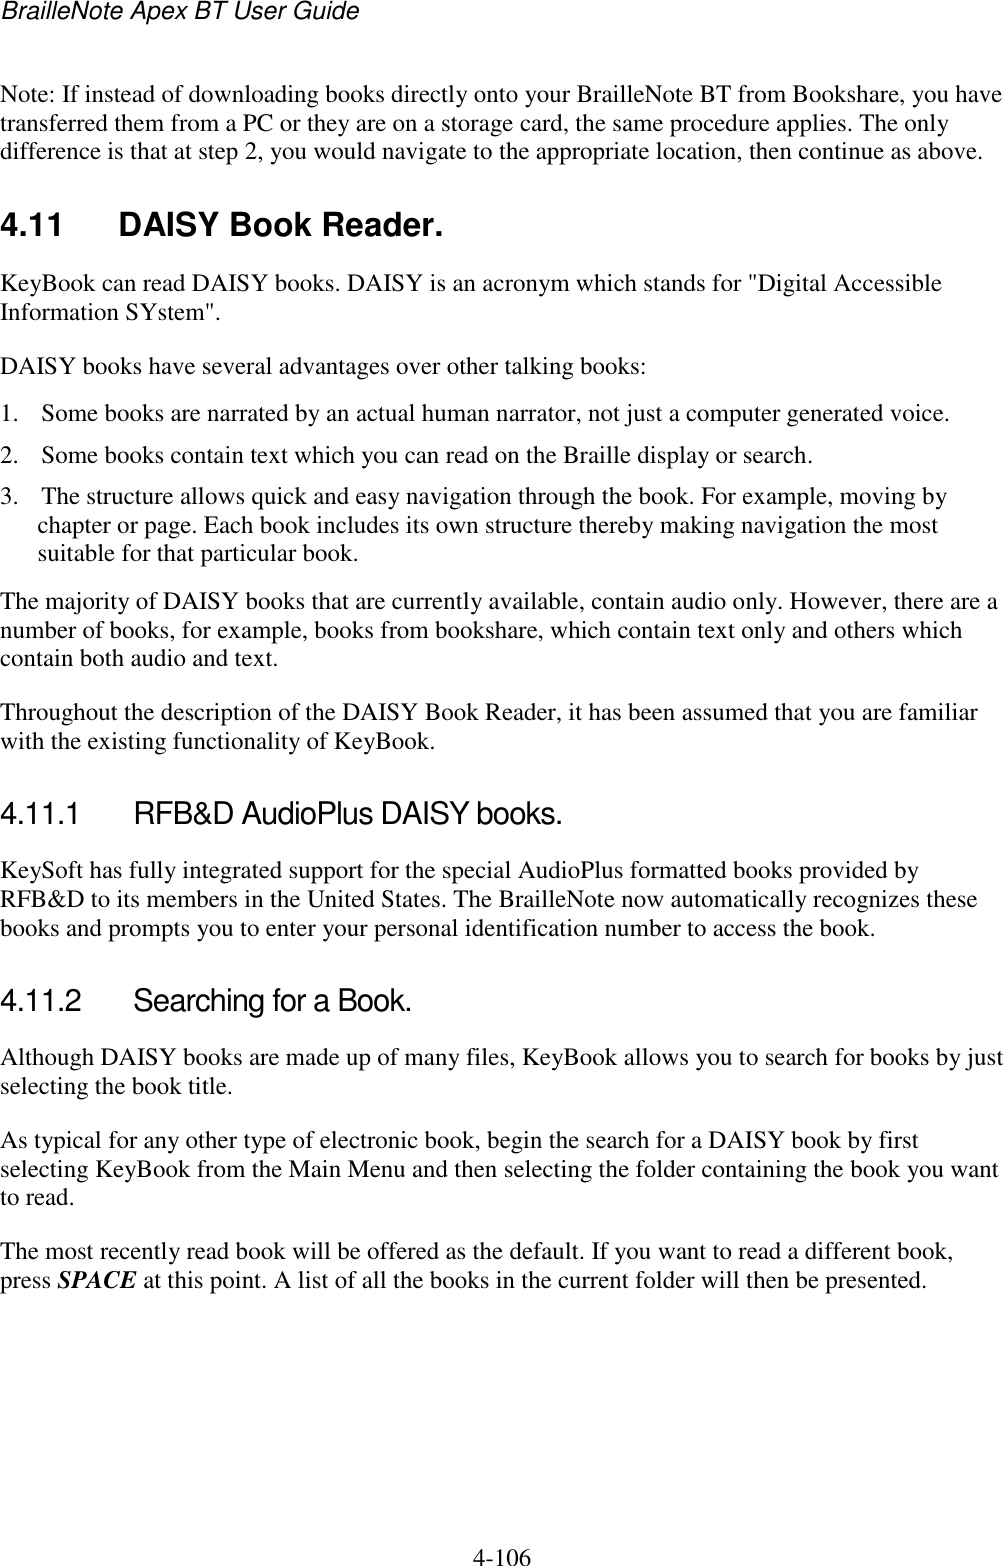 BrailleNote Apex BT User Guide   4-106   Note: If instead of downloading books directly onto your BrailleNote BT from Bookshare, you have transferred them from a PC or they are on a storage card, the same procedure applies. The only difference is that at step 2, you would navigate to the appropriate location, then continue as above.  4.11  DAISY Book Reader. KeyBook can read DAISY books. DAISY is an acronym which stands for &quot;Digital Accessible Information SYstem&quot;. DAISY books have several advantages over other talking books: 1. Some books are narrated by an actual human narrator, not just a computer generated voice. 2. Some books contain text which you can read on the Braille display or search. 3. The structure allows quick and easy navigation through the book. For example, moving by chapter or page. Each book includes its own structure thereby making navigation the most suitable for that particular book. The majority of DAISY books that are currently available, contain audio only. However, there are a number of books, for example, books from bookshare, which contain text only and others which contain both audio and text.  Throughout the description of the DAISY Book Reader, it has been assumed that you are familiar with the existing functionality of KeyBook.  4.11.1  RFB&amp;D AudioPlus DAISY books. KeySoft has fully integrated support for the special AudioPlus formatted books provided by RFB&amp;D to its members in the United States. The BrailleNote now automatically recognizes these books and prompts you to enter your personal identification number to access the book.  4.11.2  Searching for a Book. Although DAISY books are made up of many files, KeyBook allows you to search for books by just selecting the book title.  As typical for any other type of electronic book, begin the search for a DAISY book by first selecting KeyBook from the Main Menu and then selecting the folder containing the book you want to read. The most recently read book will be offered as the default. If you want to read a different book, press SPACE at this point. A list of all the books in the current folder will then be presented.   